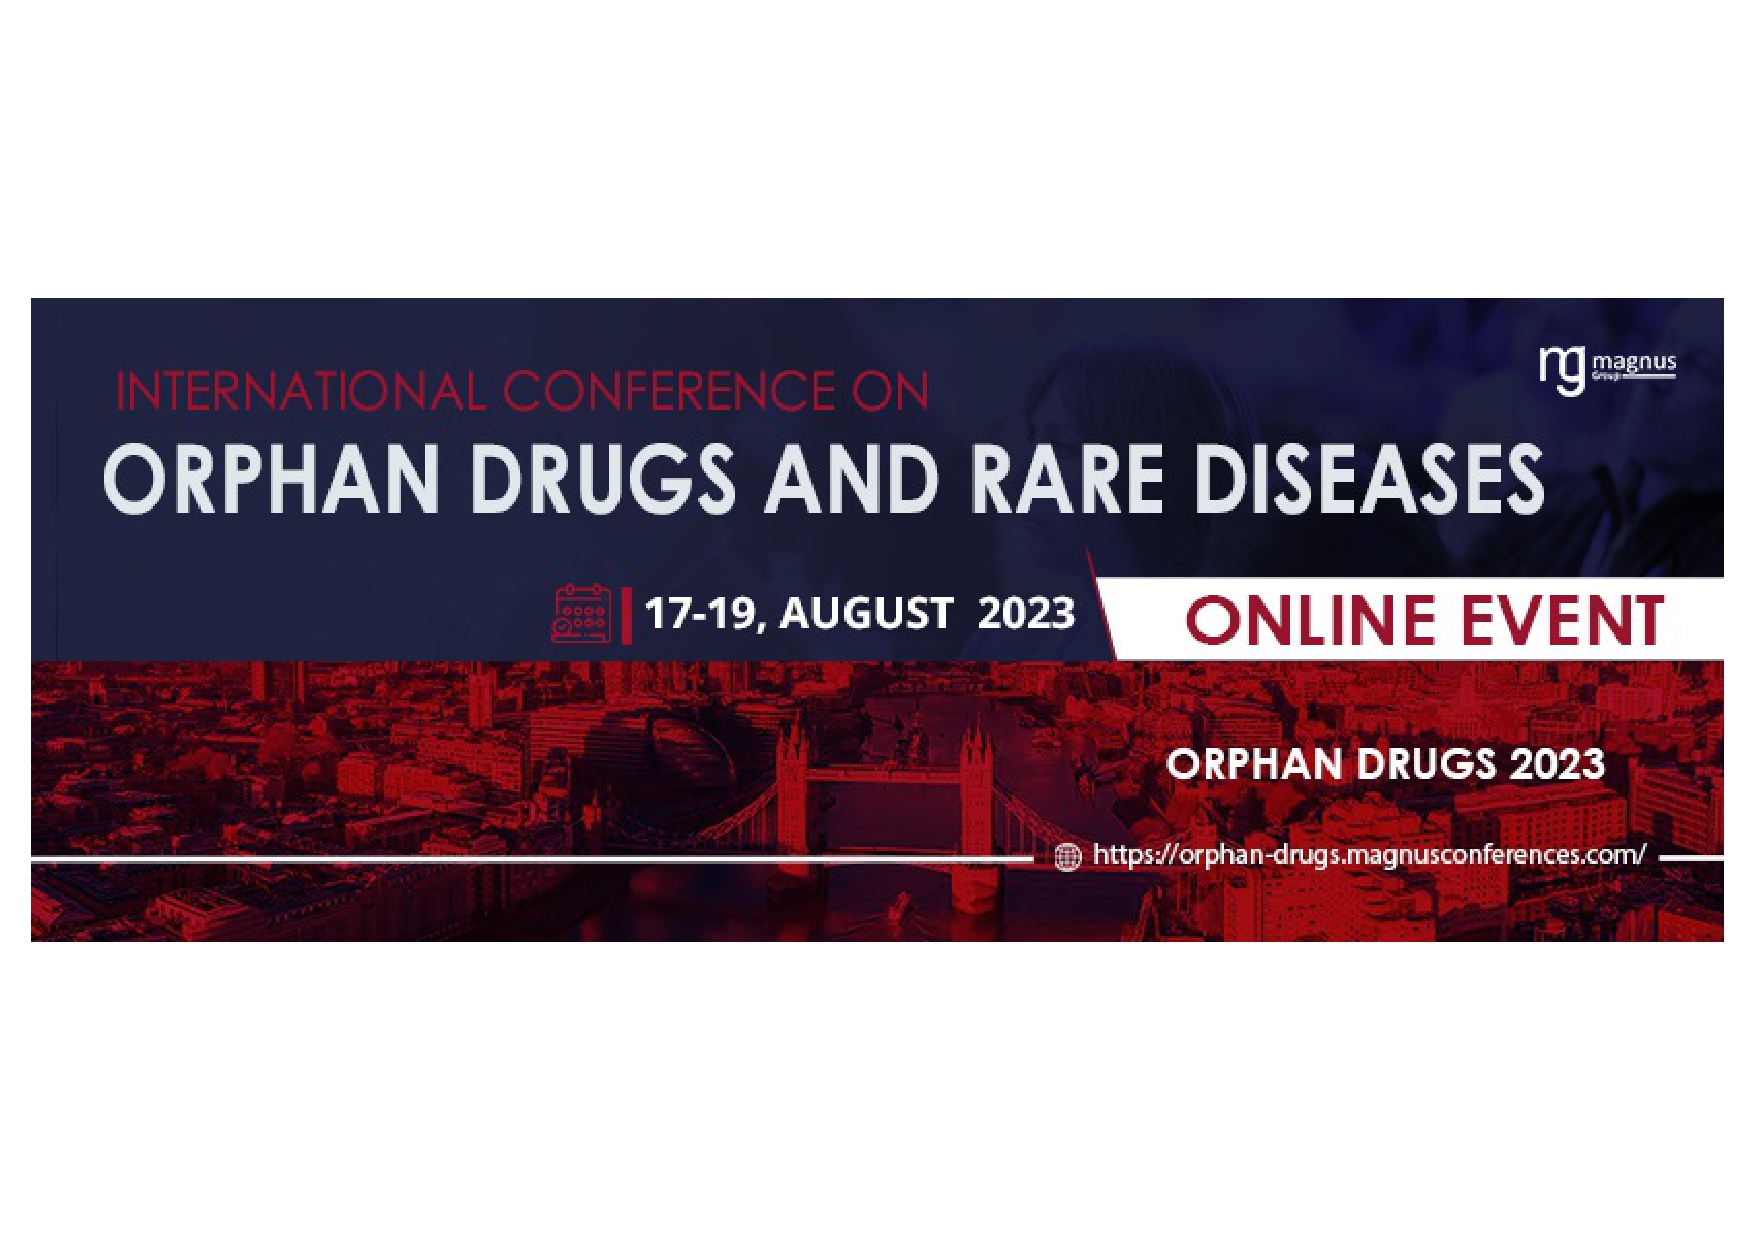 International conference on Orphan Drugs and Rare Diseases